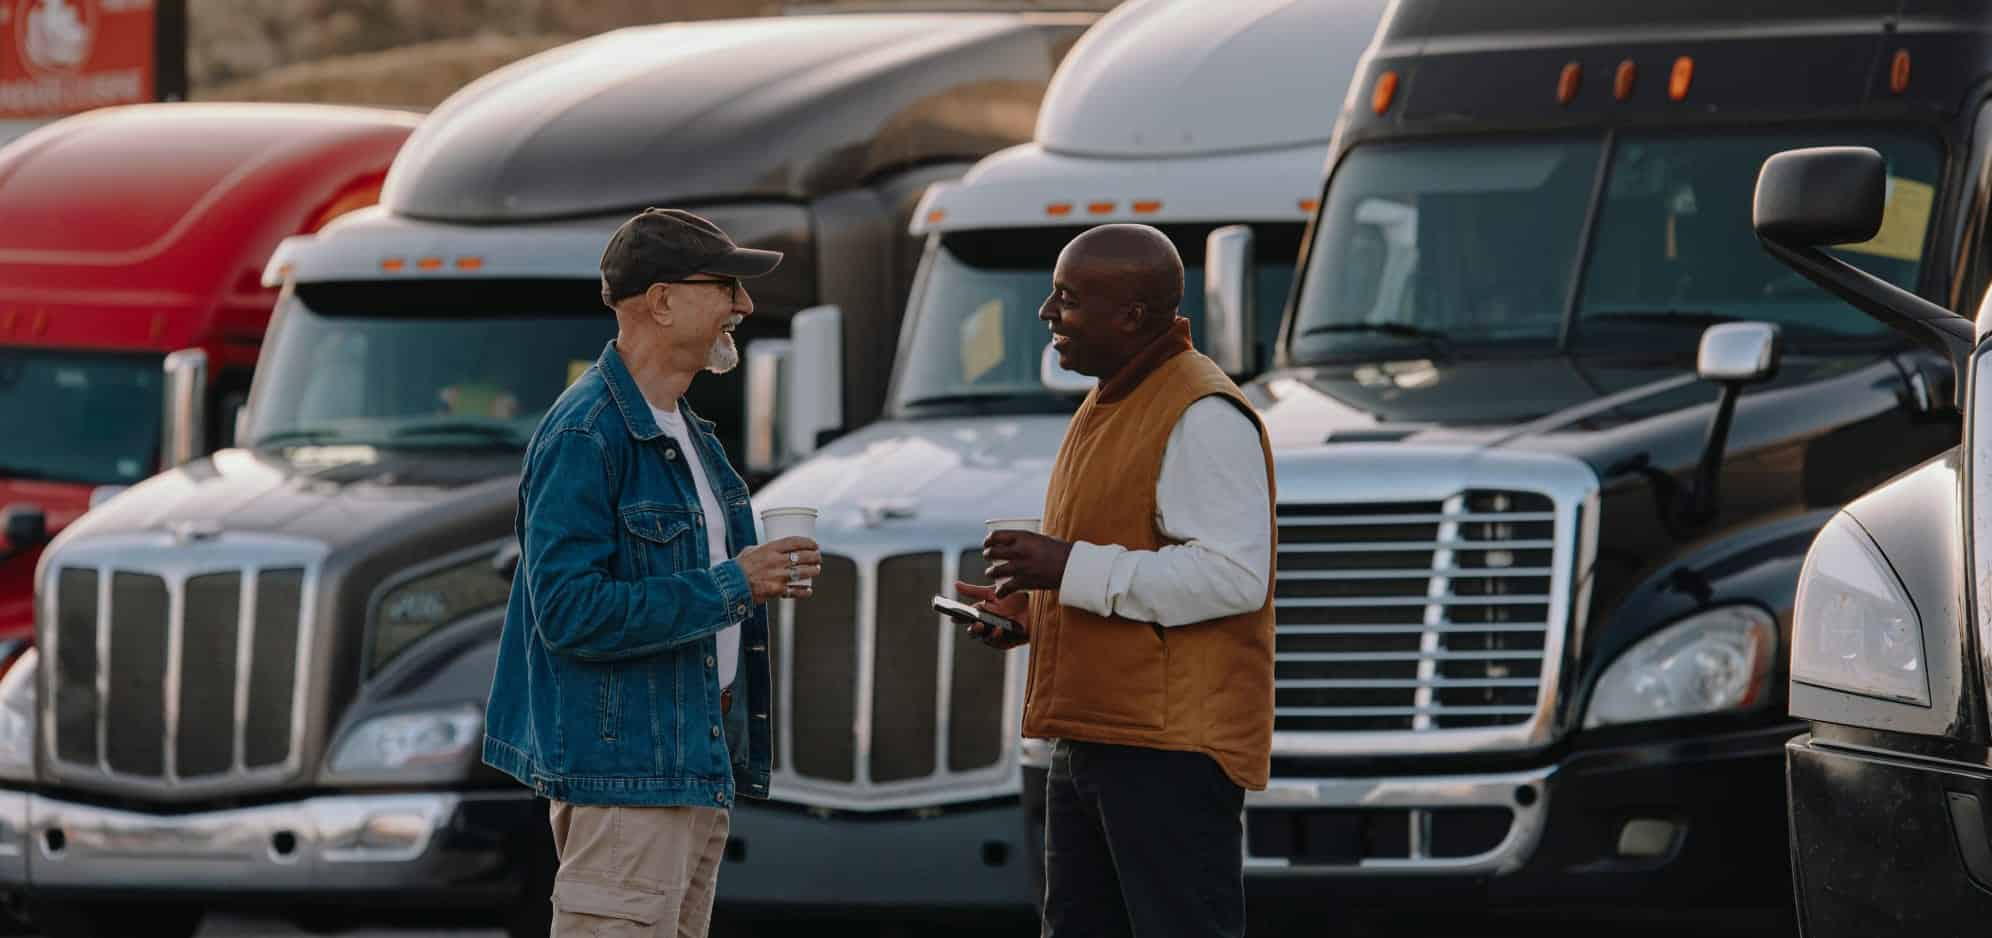 two men discussing something in front of truck